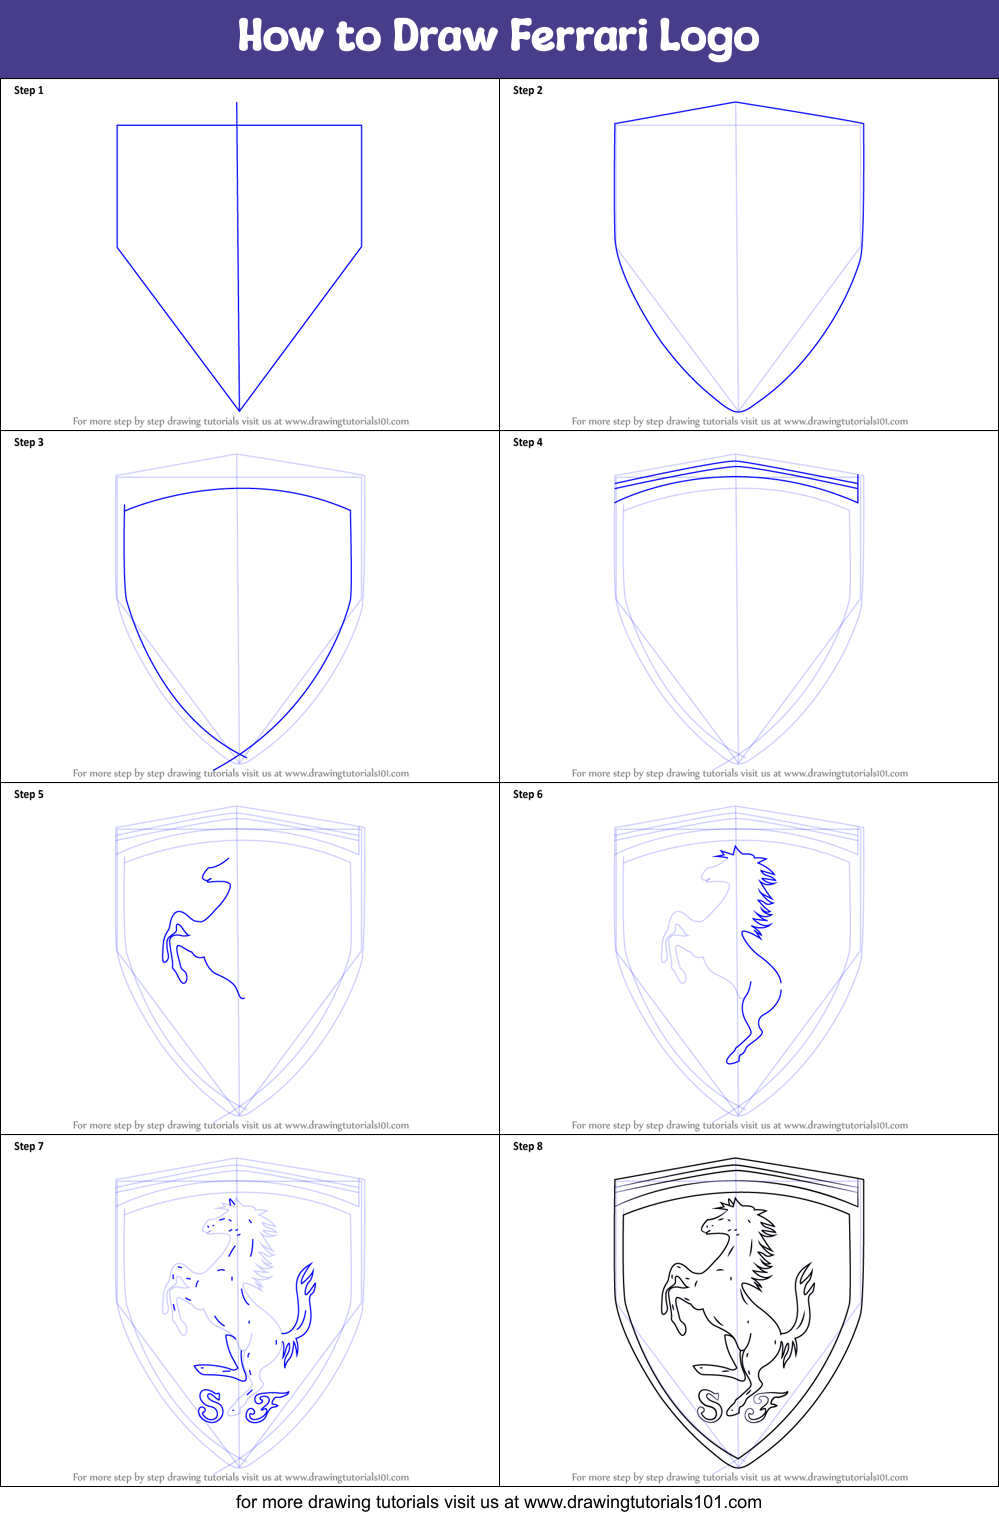 How to Draw Ferrari Logo printable step by step drawing sheet